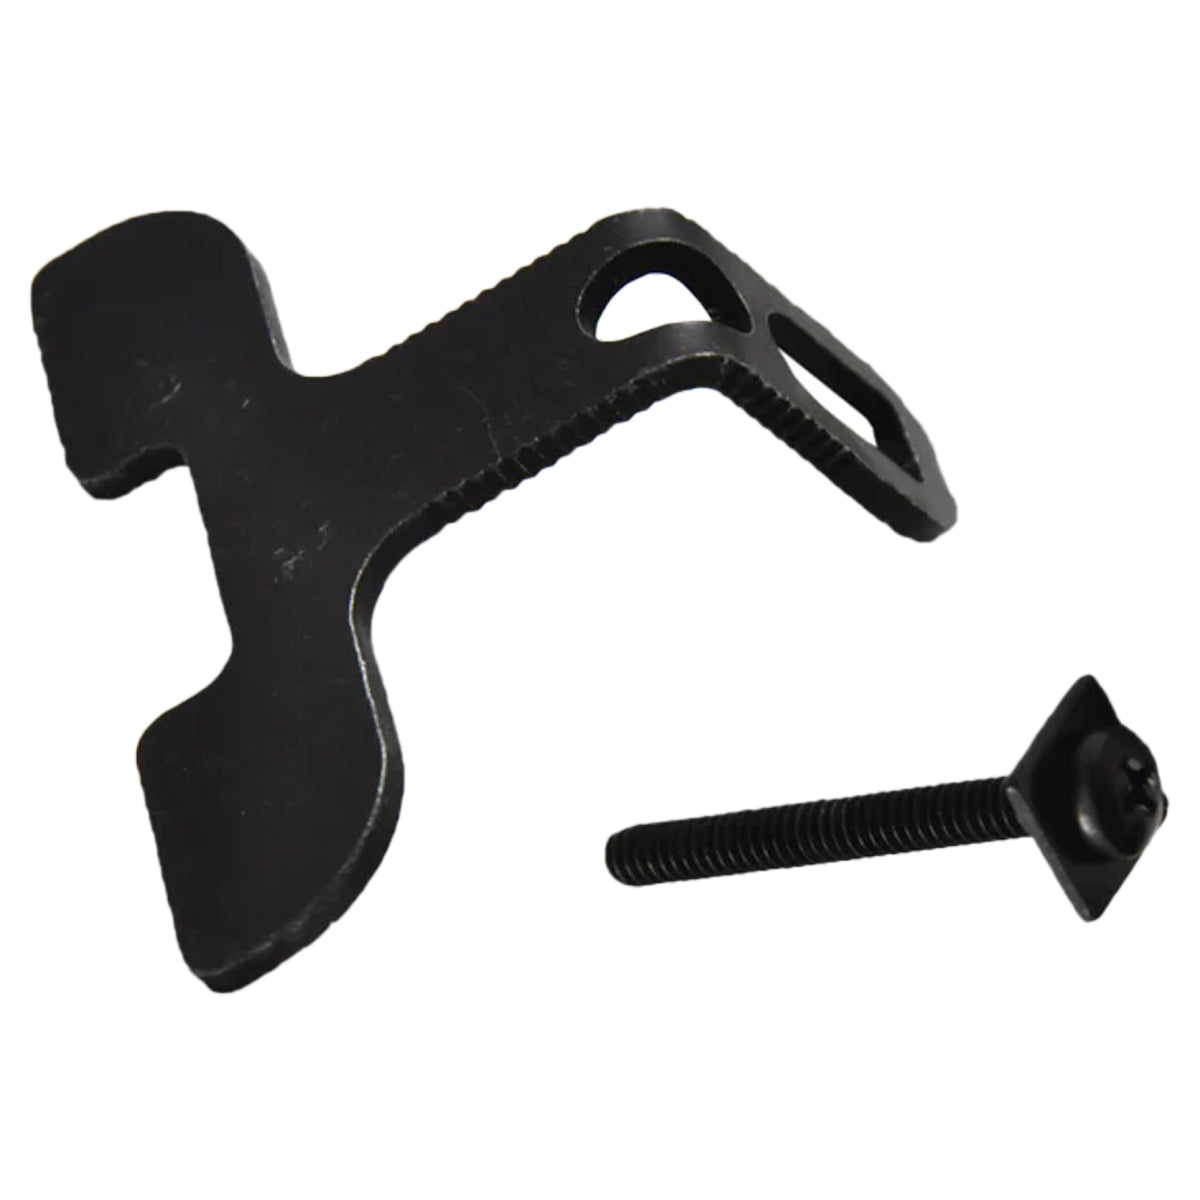 Dead On Display Angled Skull Mount Bracket Adapter Only